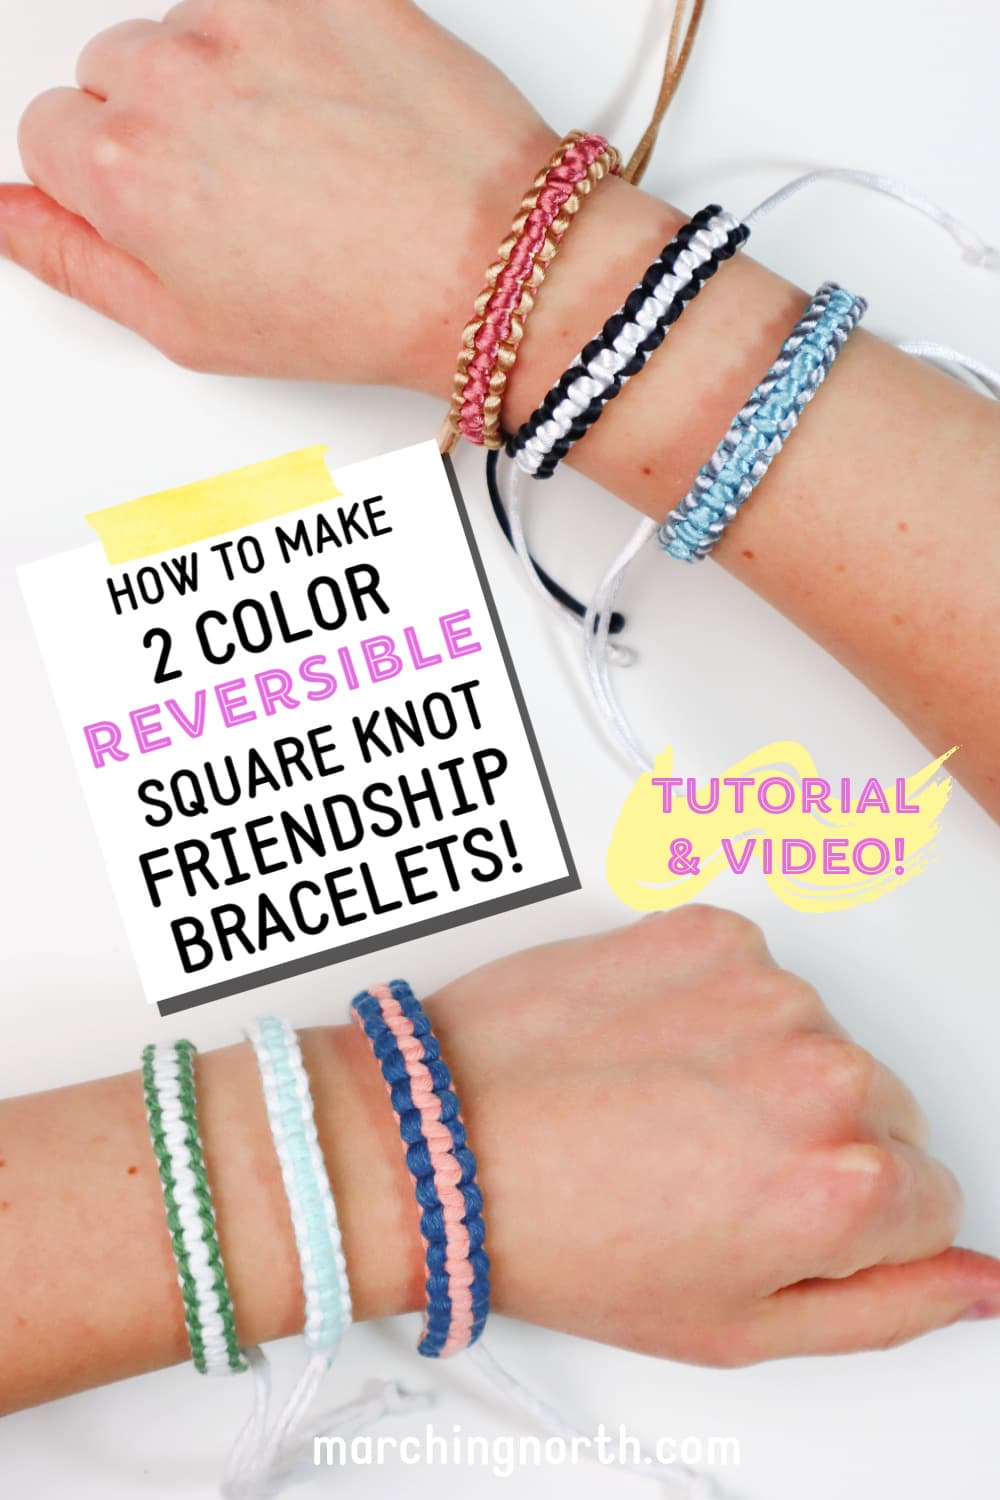 How to make a box knot leather bracelet - DIY Tutorial 